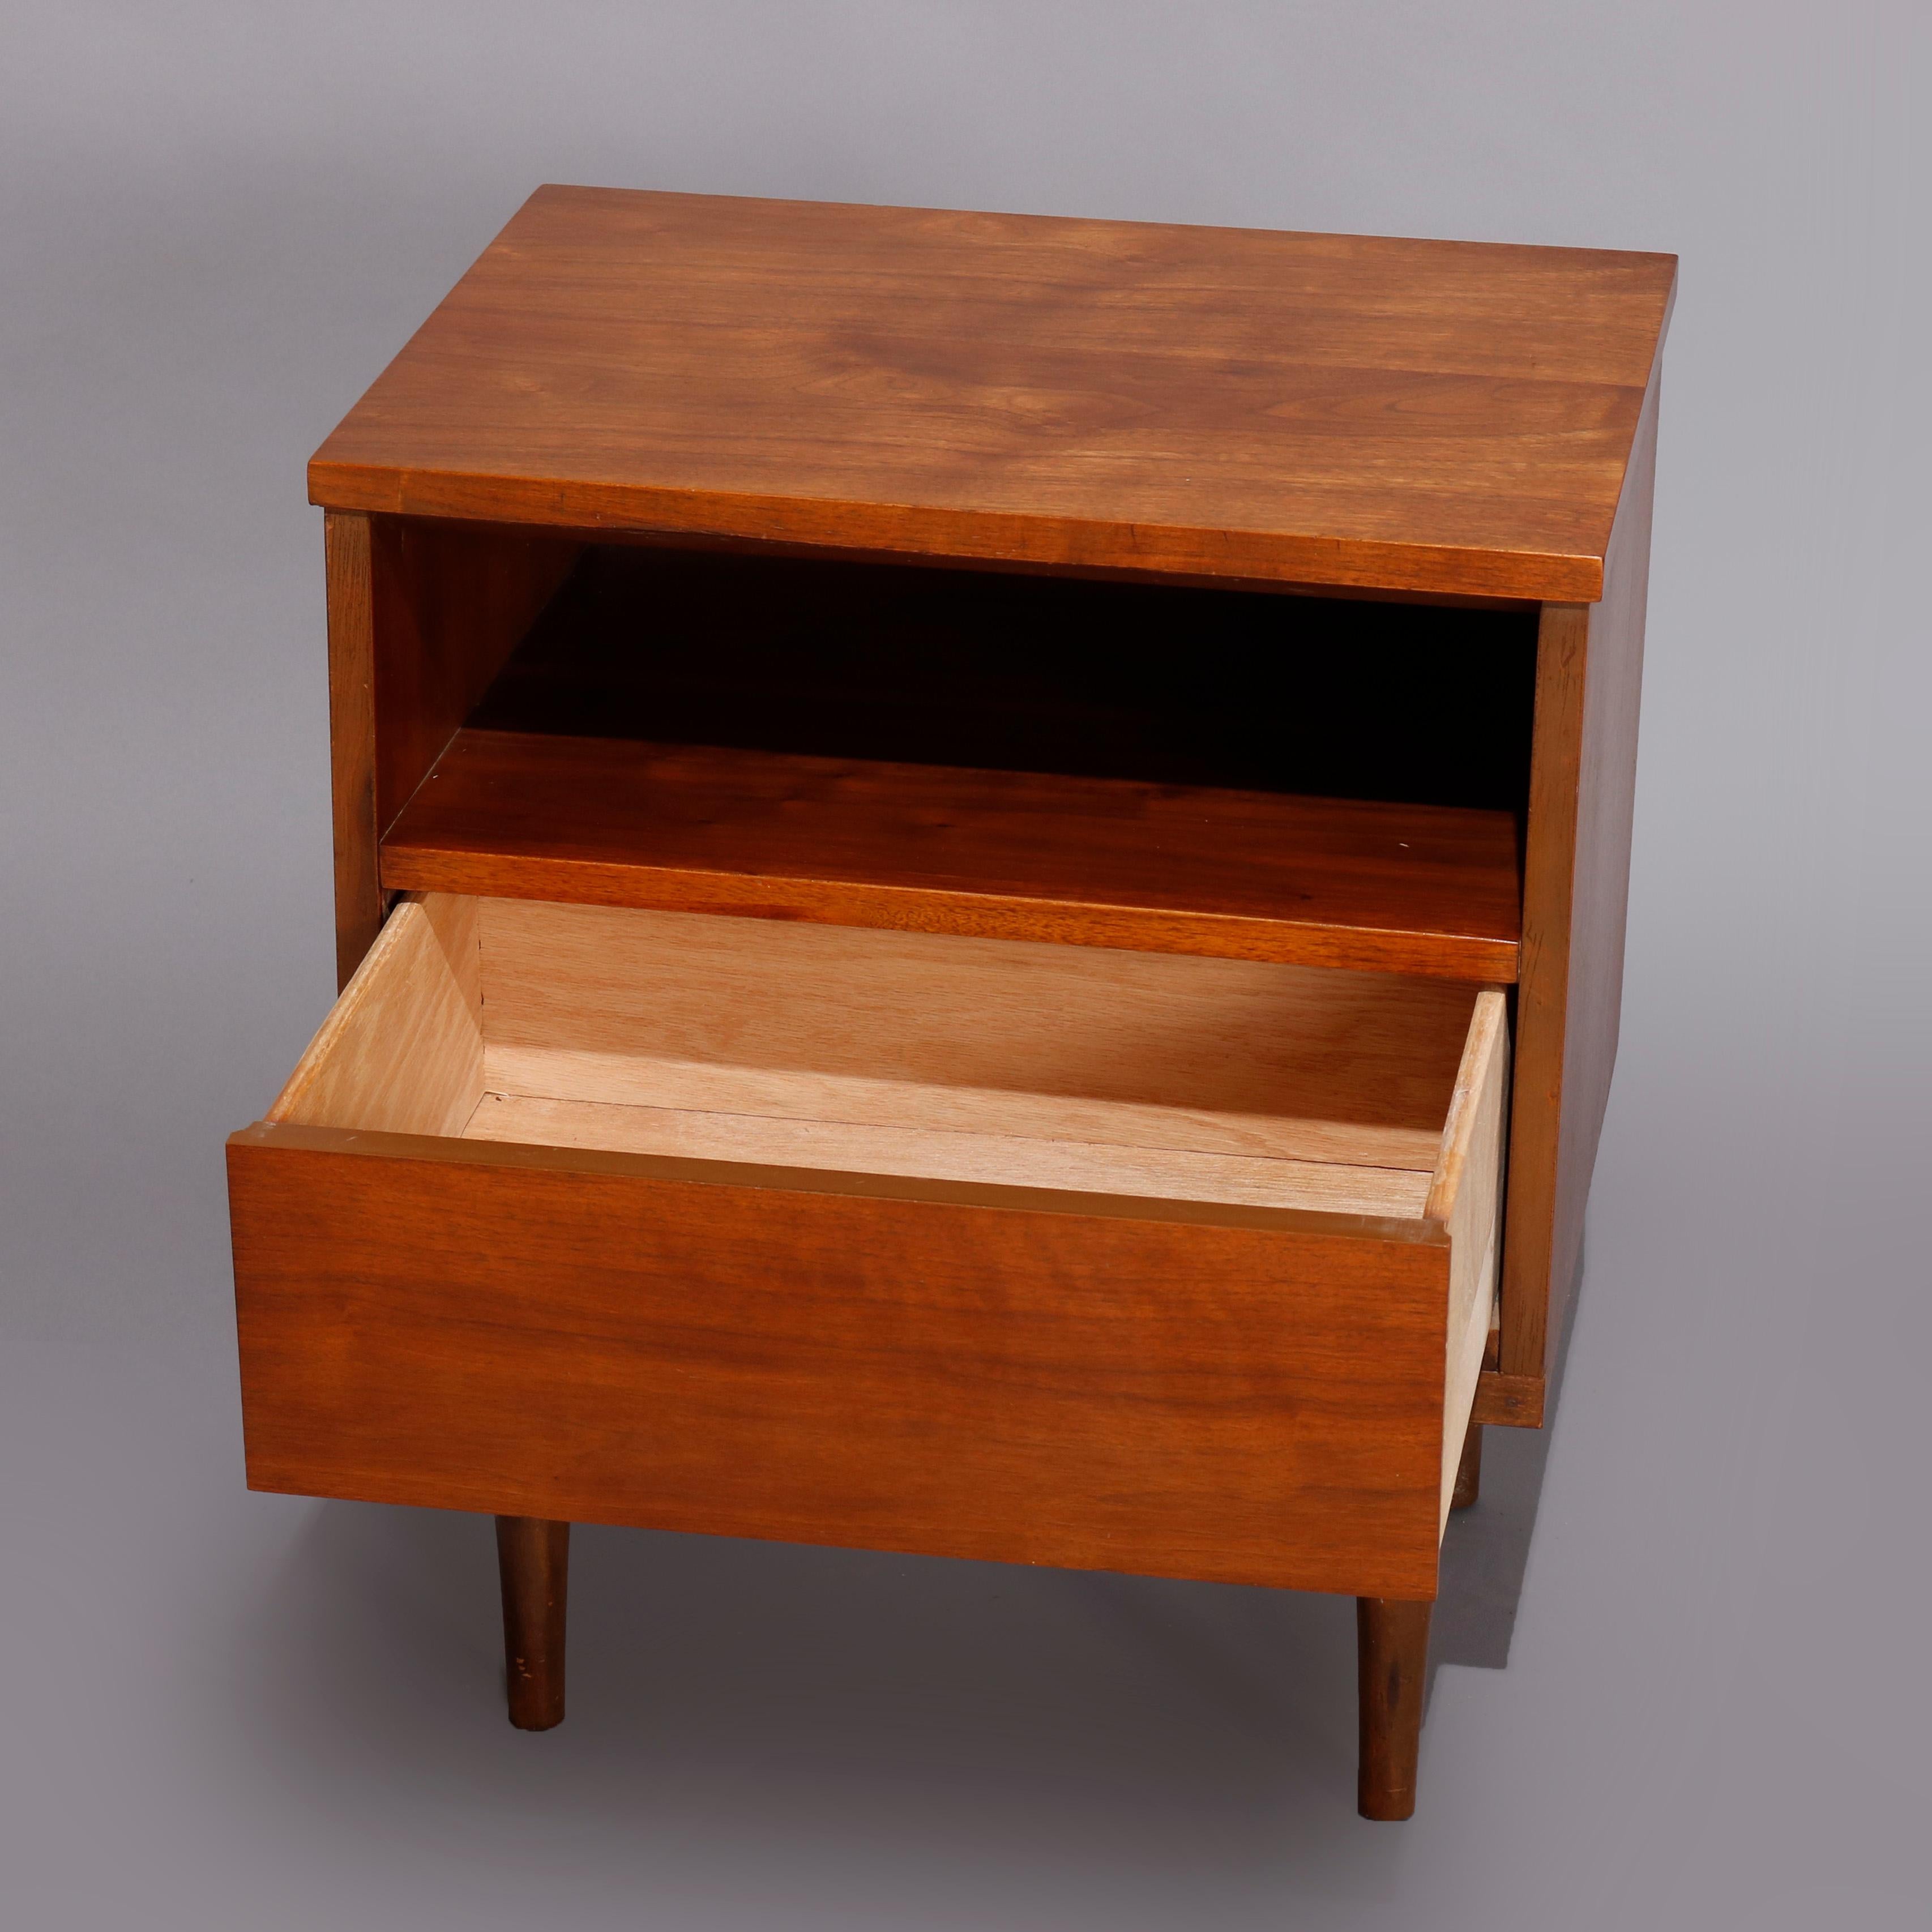 A vintage midcentury Danish modern end or nightstand offers walnut construction with upper shelf over drawer, raised on turned and tapered legs, circa 1960

Measures: 24.25